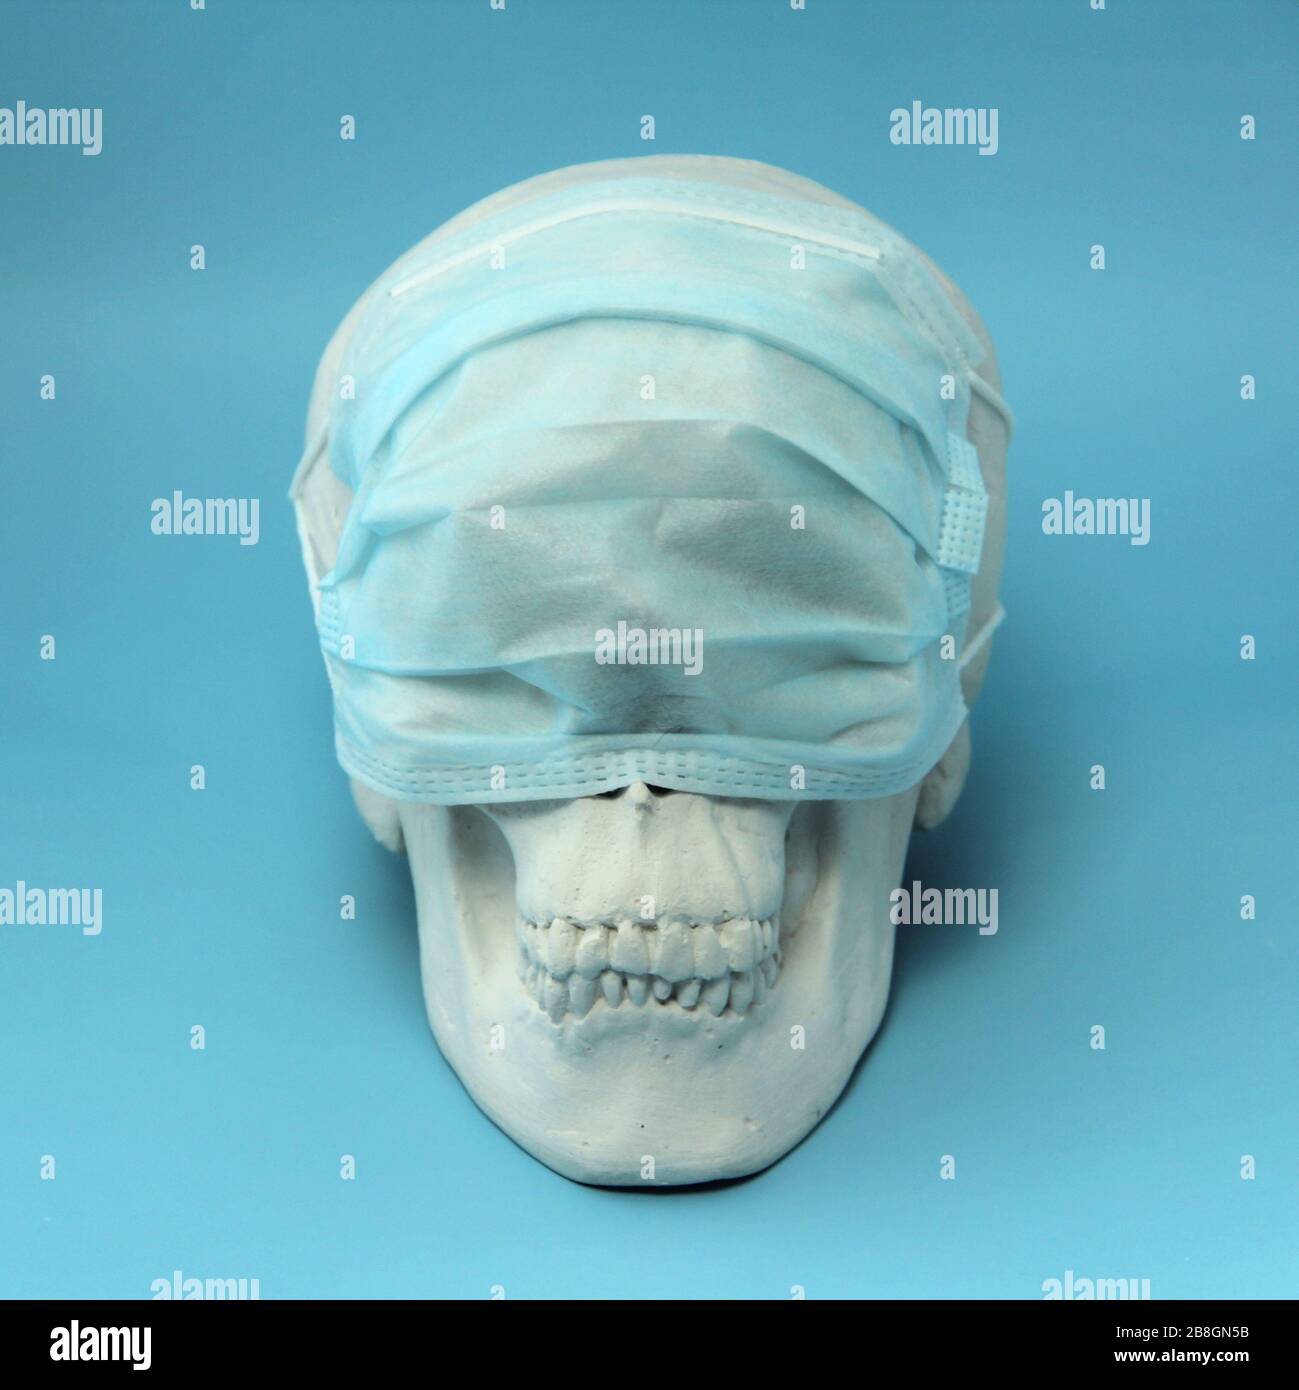 White human skull made of gypsum on a blue background with a medical mask on his eyes. The concept of health, medicine, epidemic and coronovirus. Stock Photo